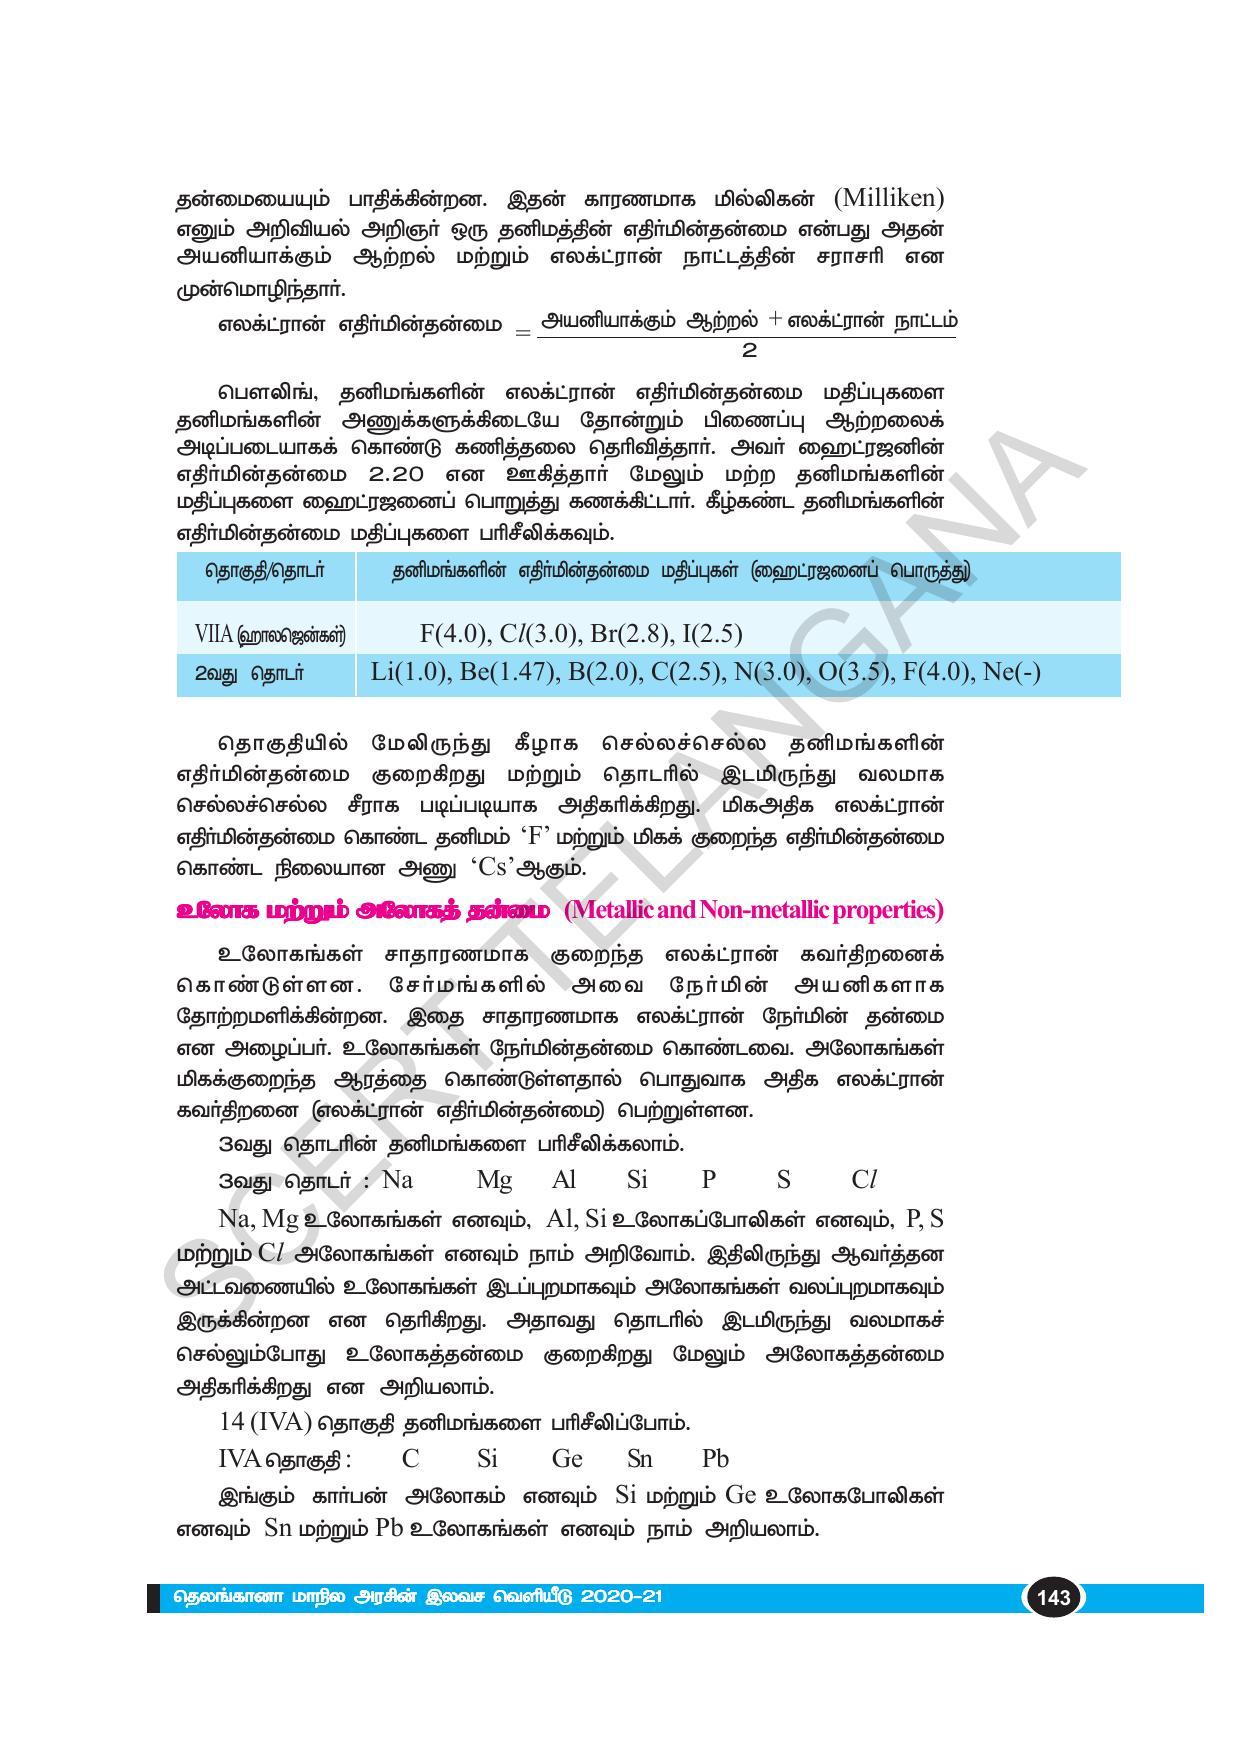 TS SCERT Class 10 Physical Science(Tamil Medium) Text Book - Page 155